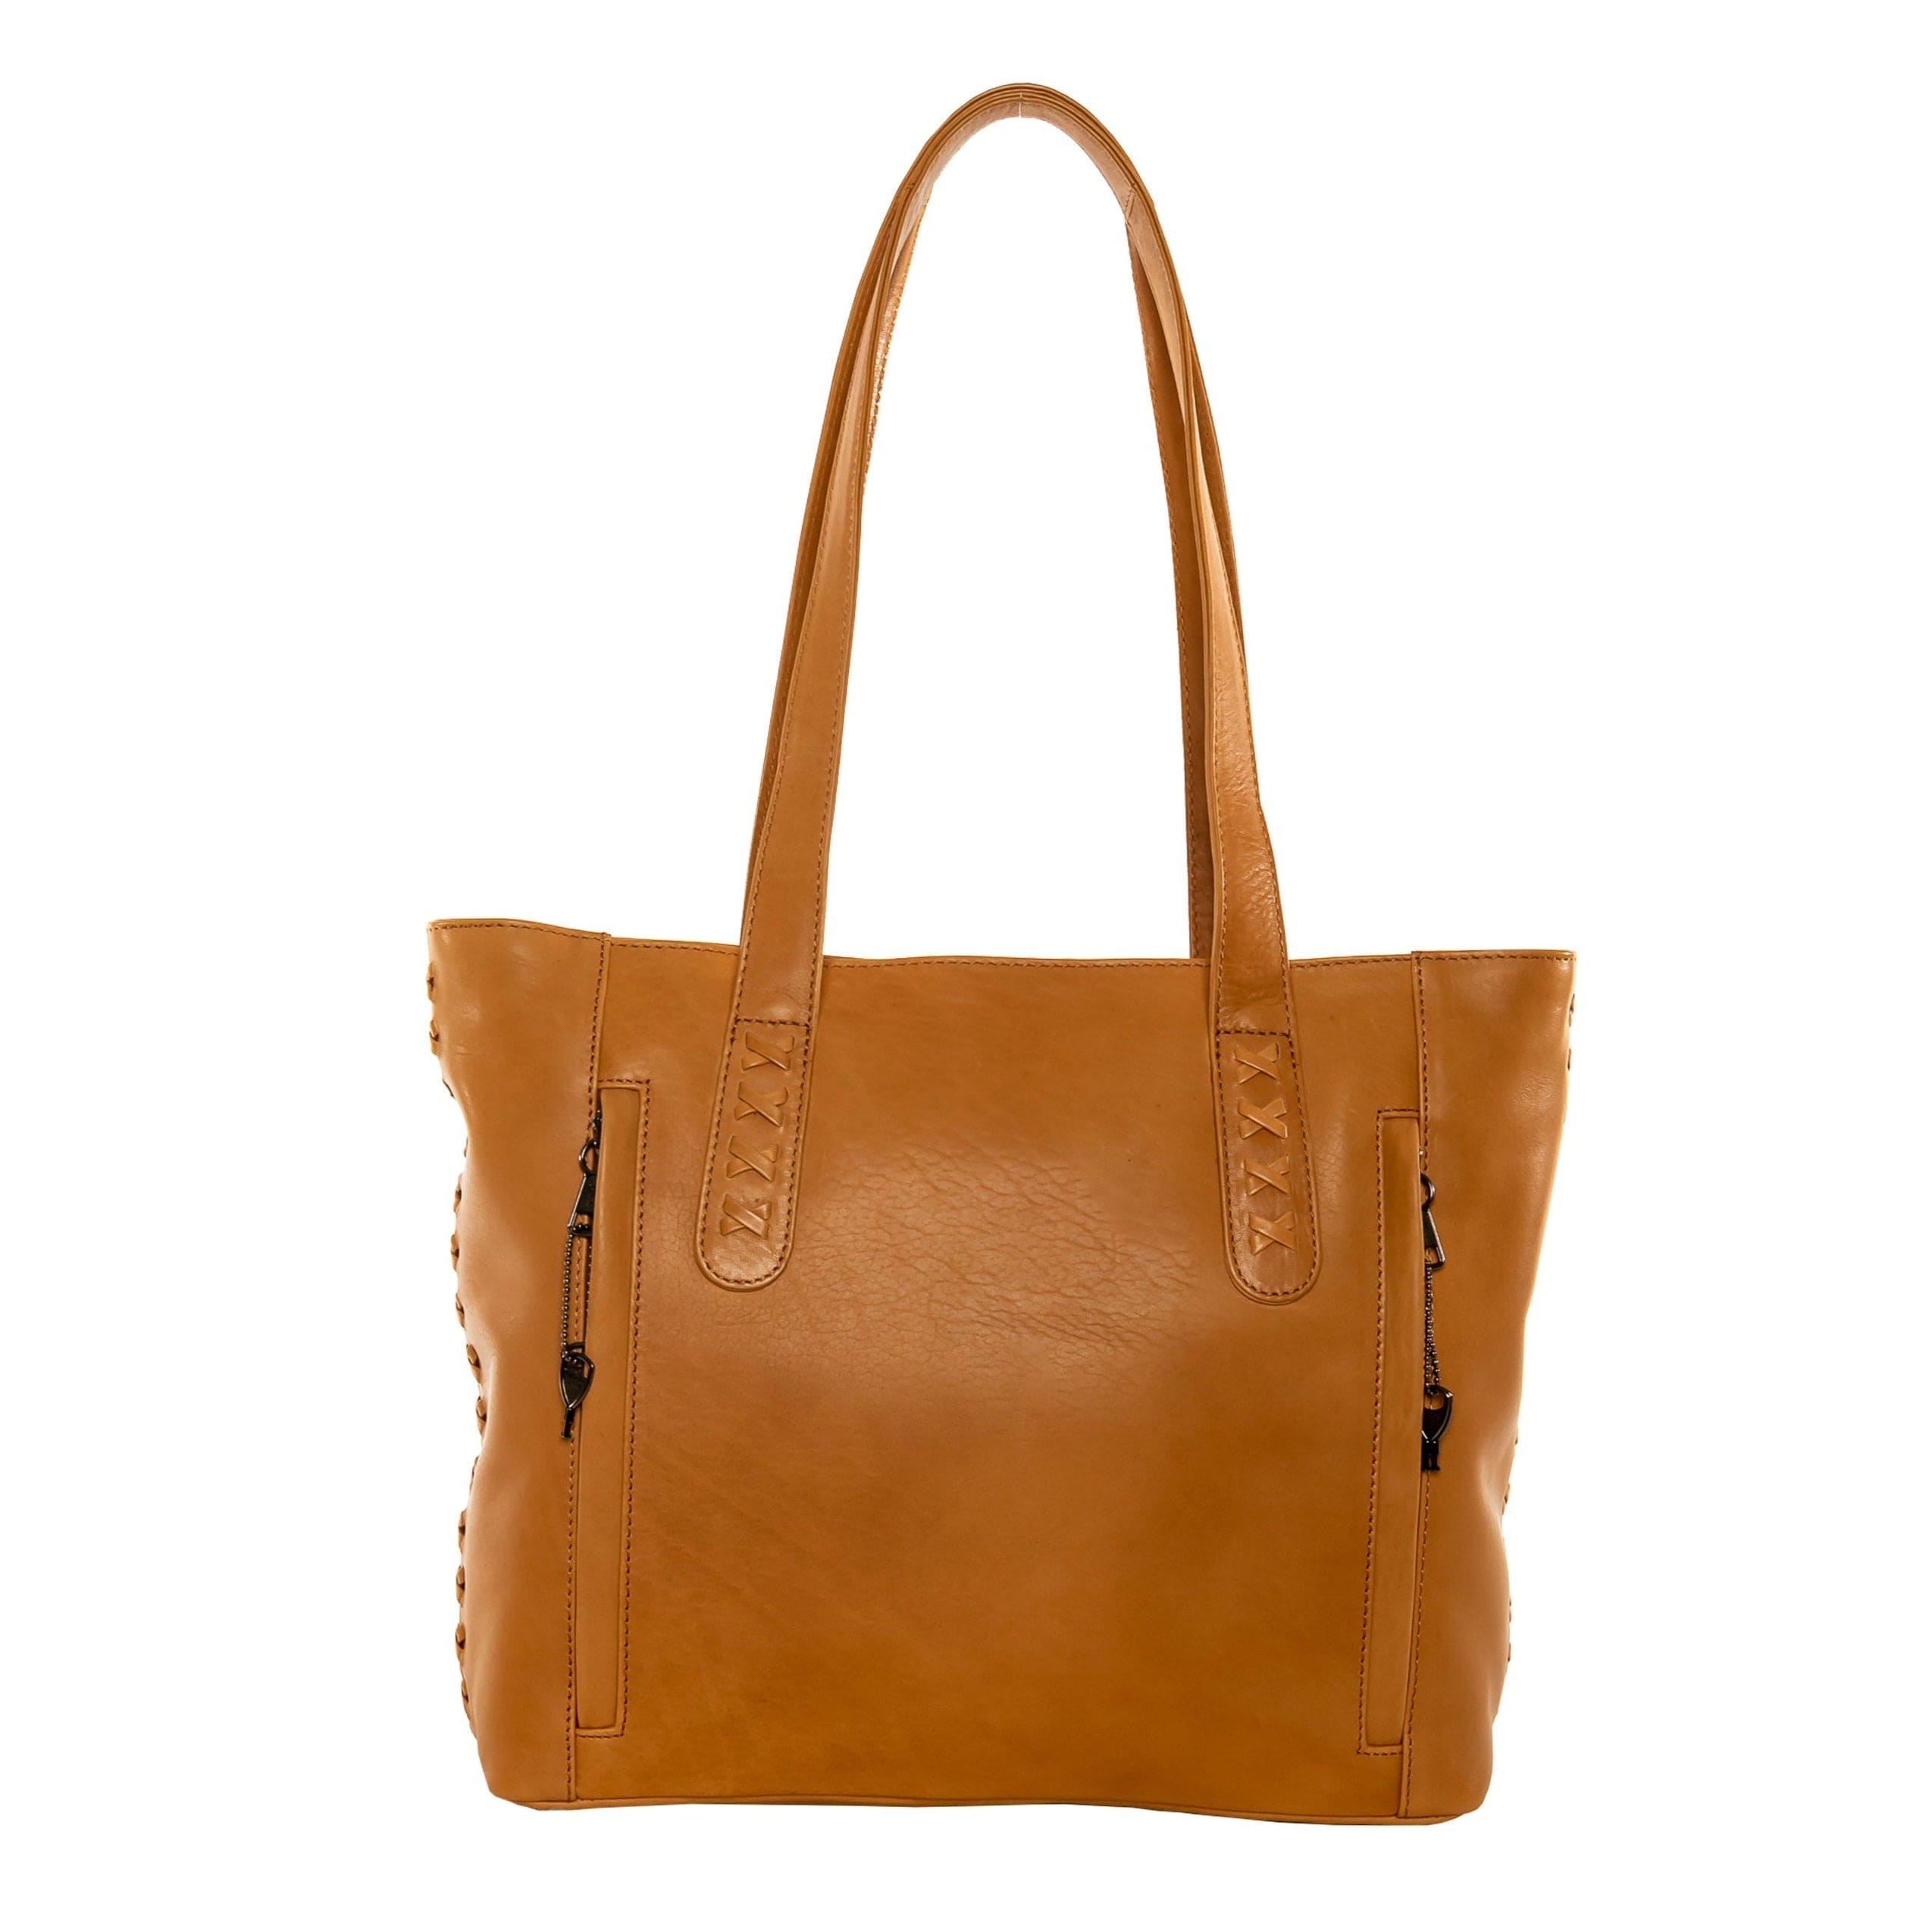 Concealed Carry Reagan Medium Leather Tote -  Lady Conceal -  Concealed Carry Purse -  Designer Luxury Leather Carry Handbag -  carry Handbag for gun carry -  Unique Tote gun Handbag -  designer backpack purse -  designer purse sale -  designer purse sales -  womens designer purse sale -  Reagan Medium Leather Tote -  designer lady purse concealed carry gun Handbag -   concealed carry Handbag for woman-  Easy Conceal Carry and Draw Purse -